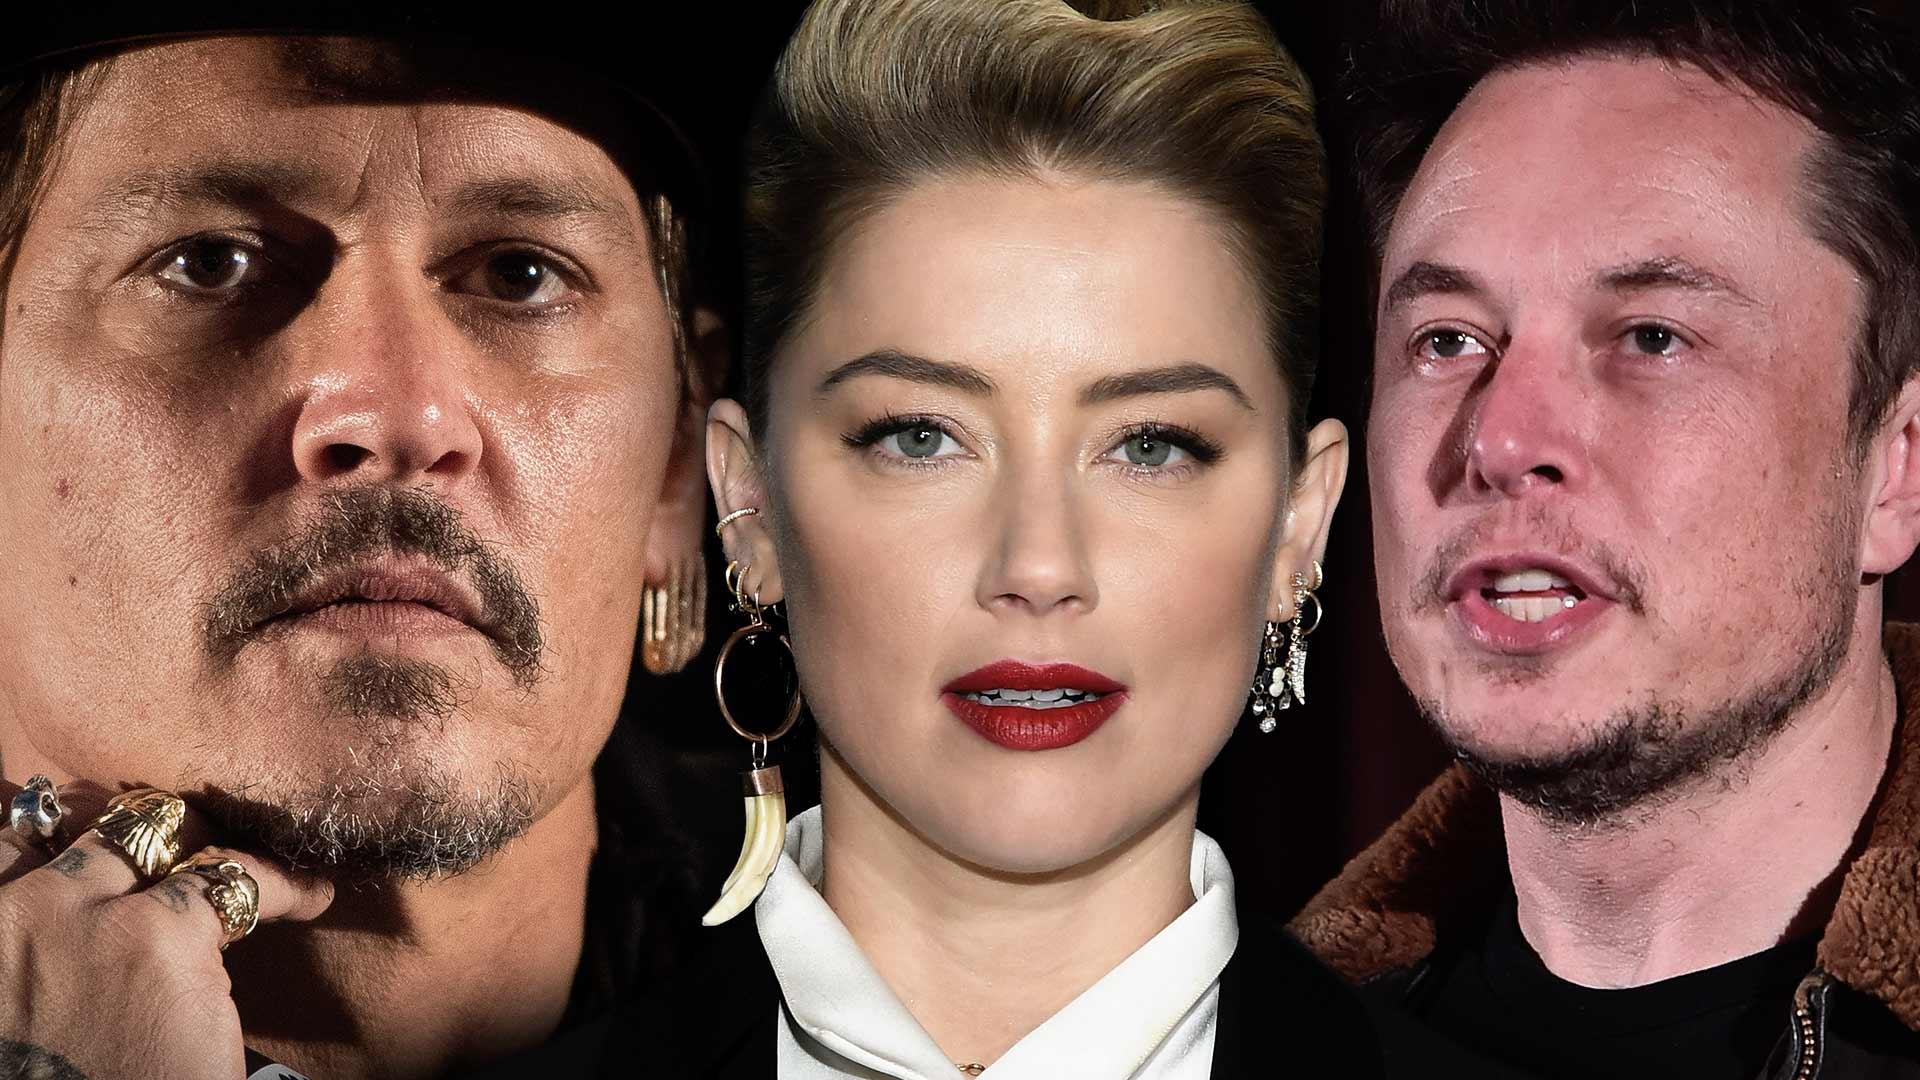 Johnny Depp Claims Amber Heard Started Improper ‘Relationship’ With Elon Musk One Month After Marriage